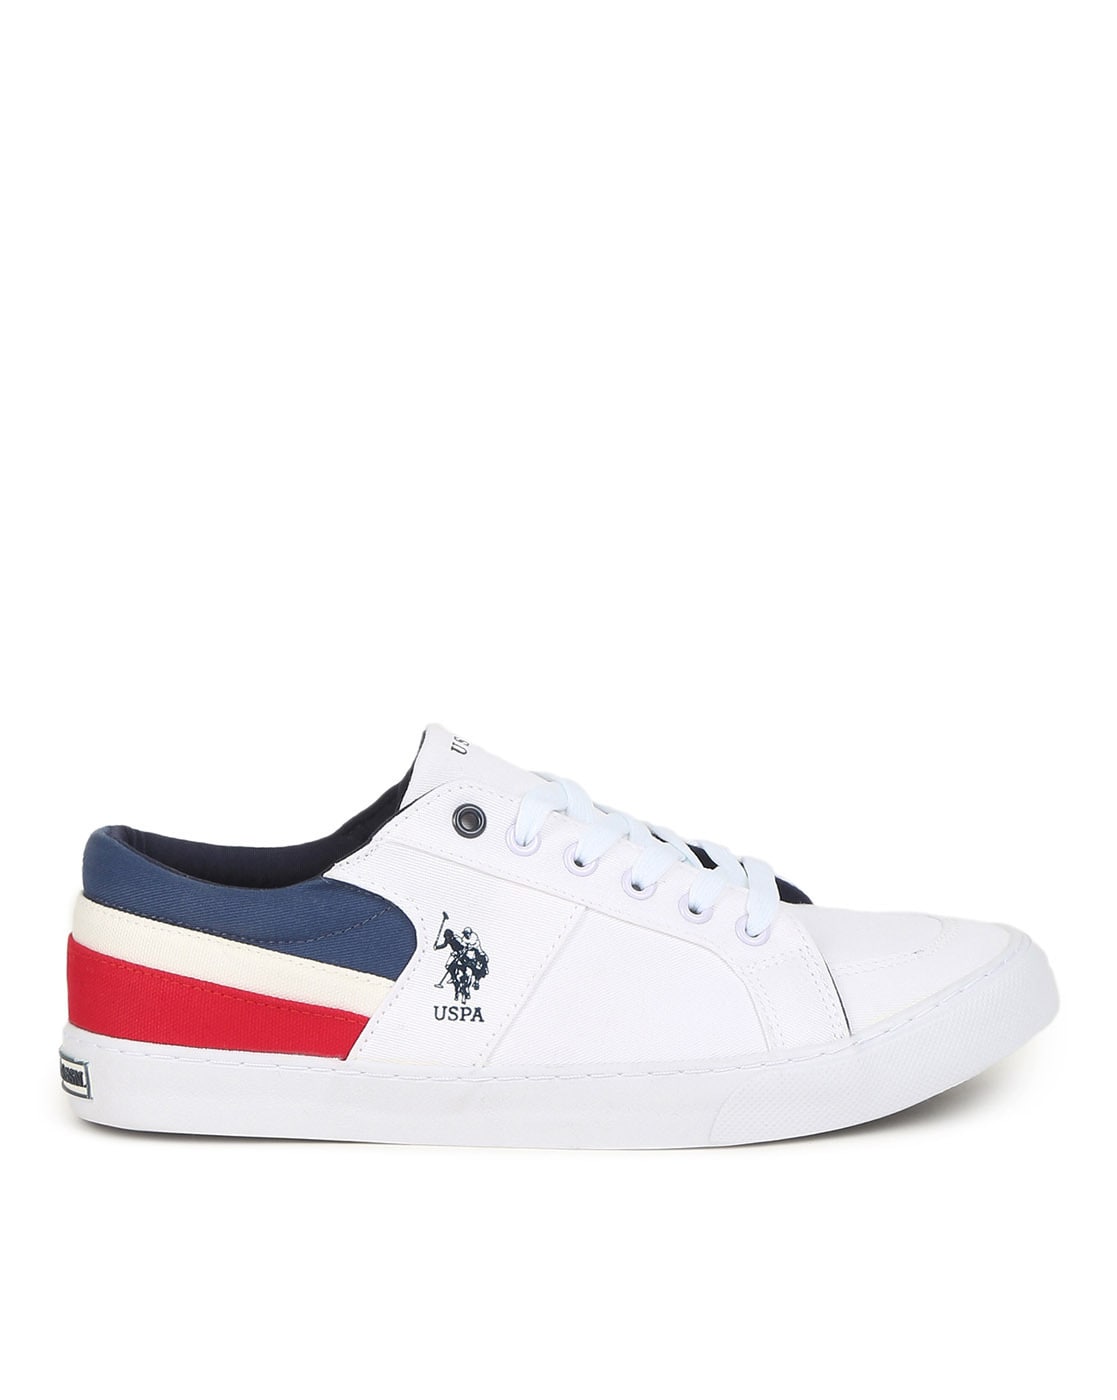 US Polo Assn Shoes for Kids | Shoe Carnival